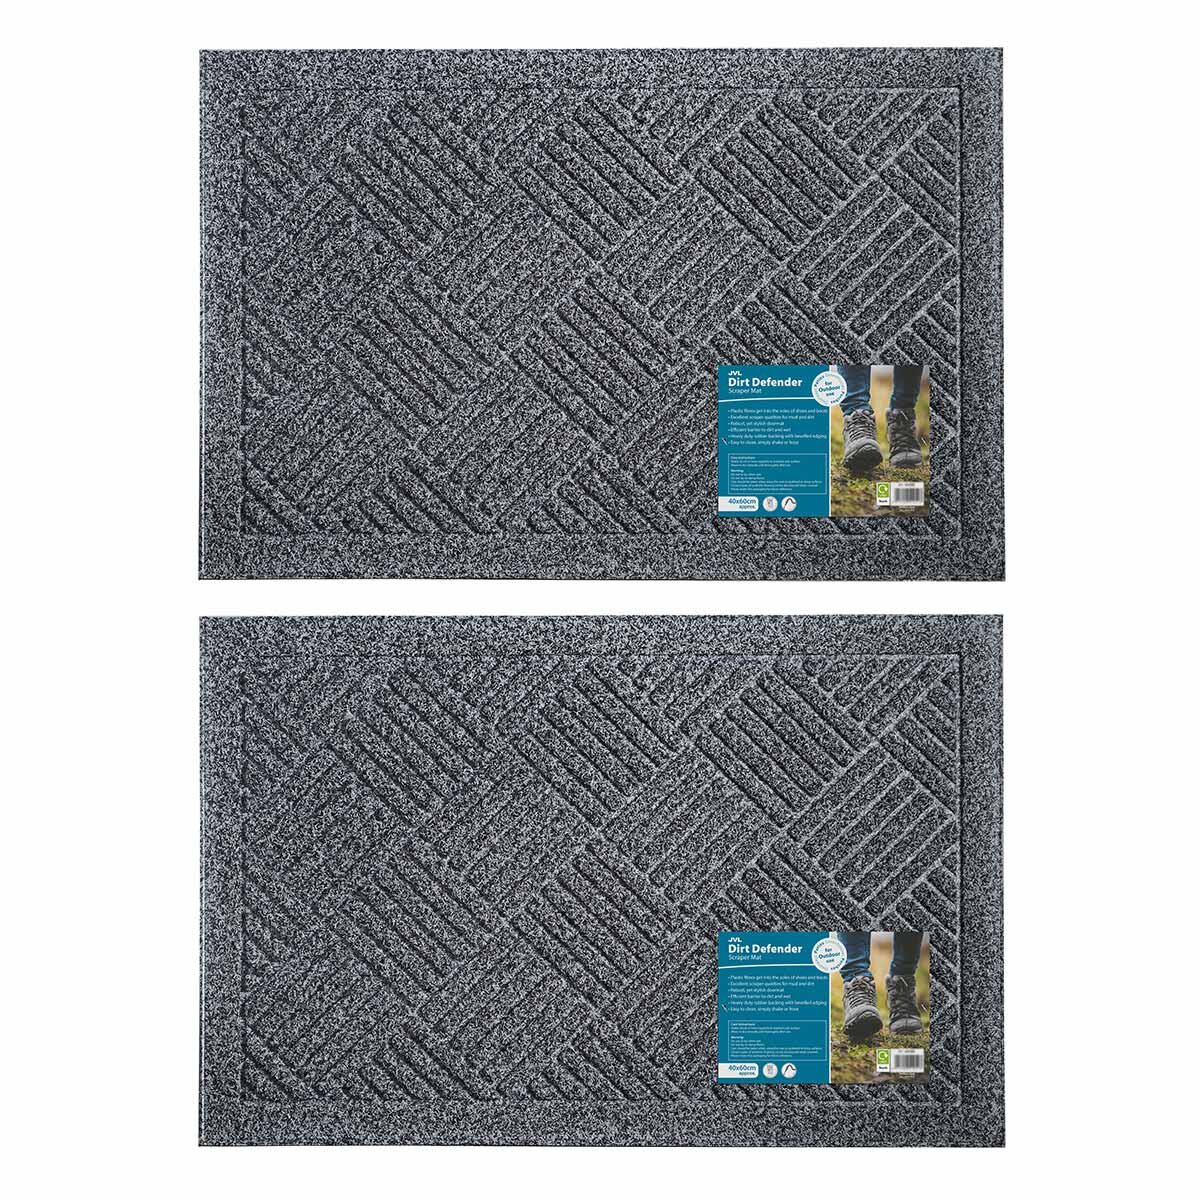 Cut out image of two mats on white background